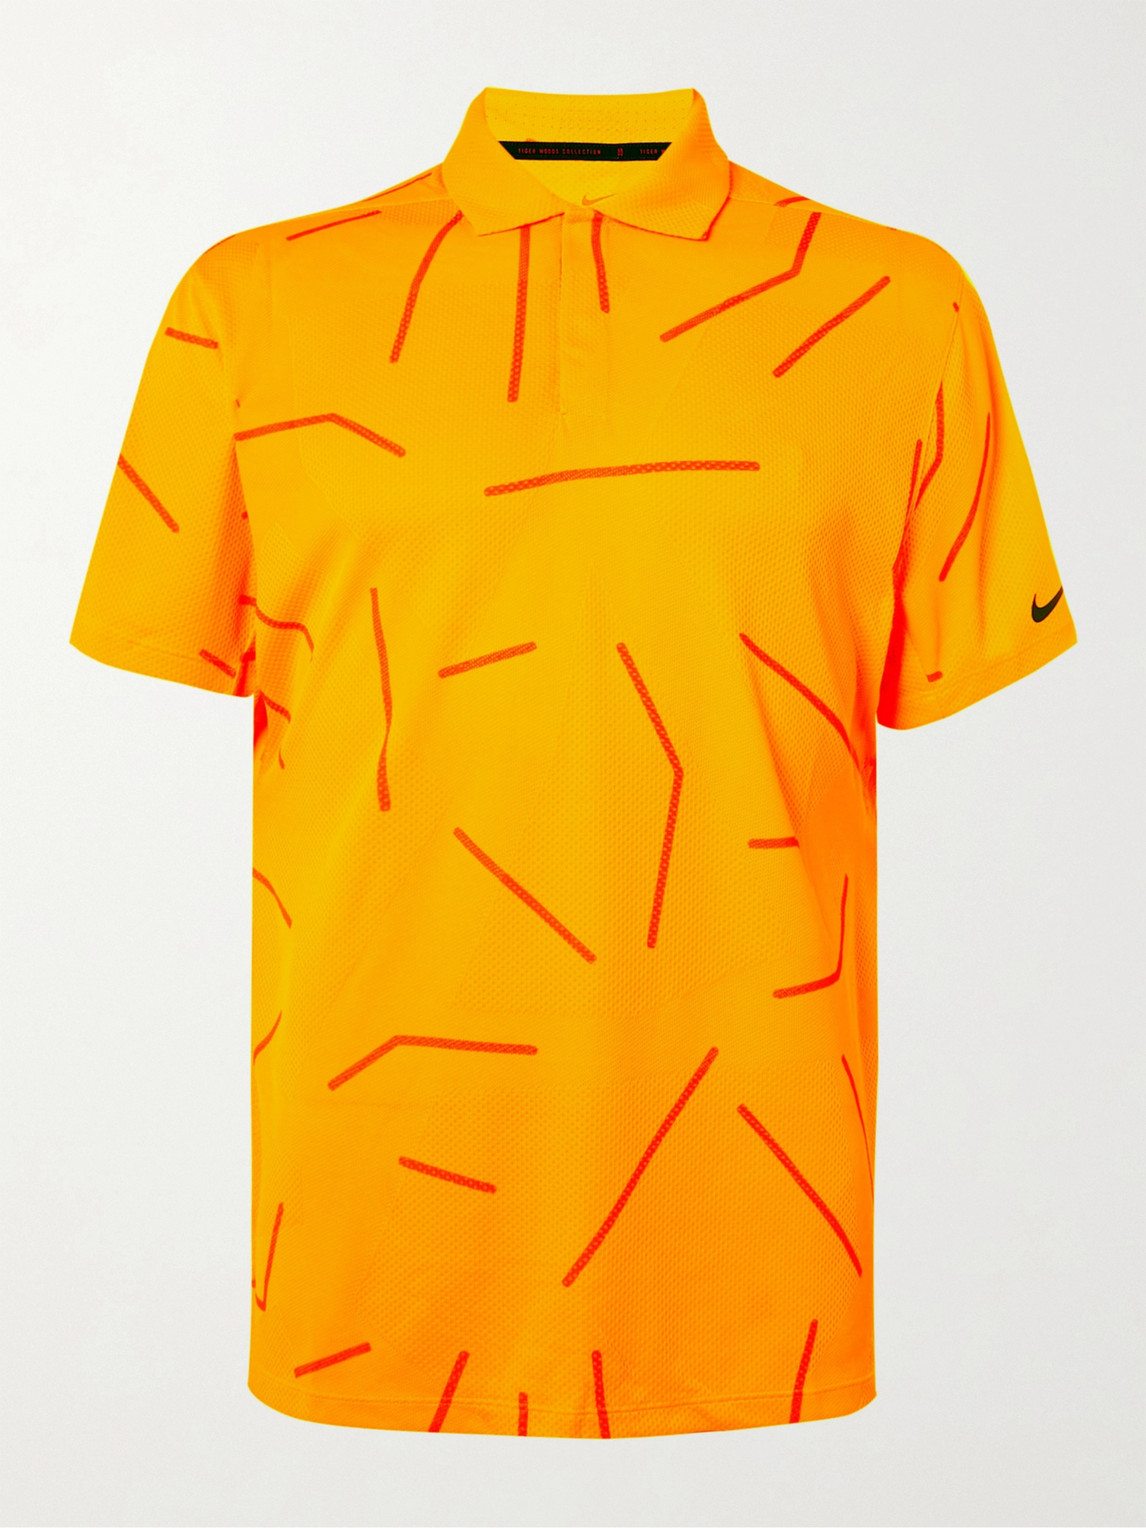 Nike Dry Course Printed Dri-fit Jacquard Golf Polo Shirt In Yellow